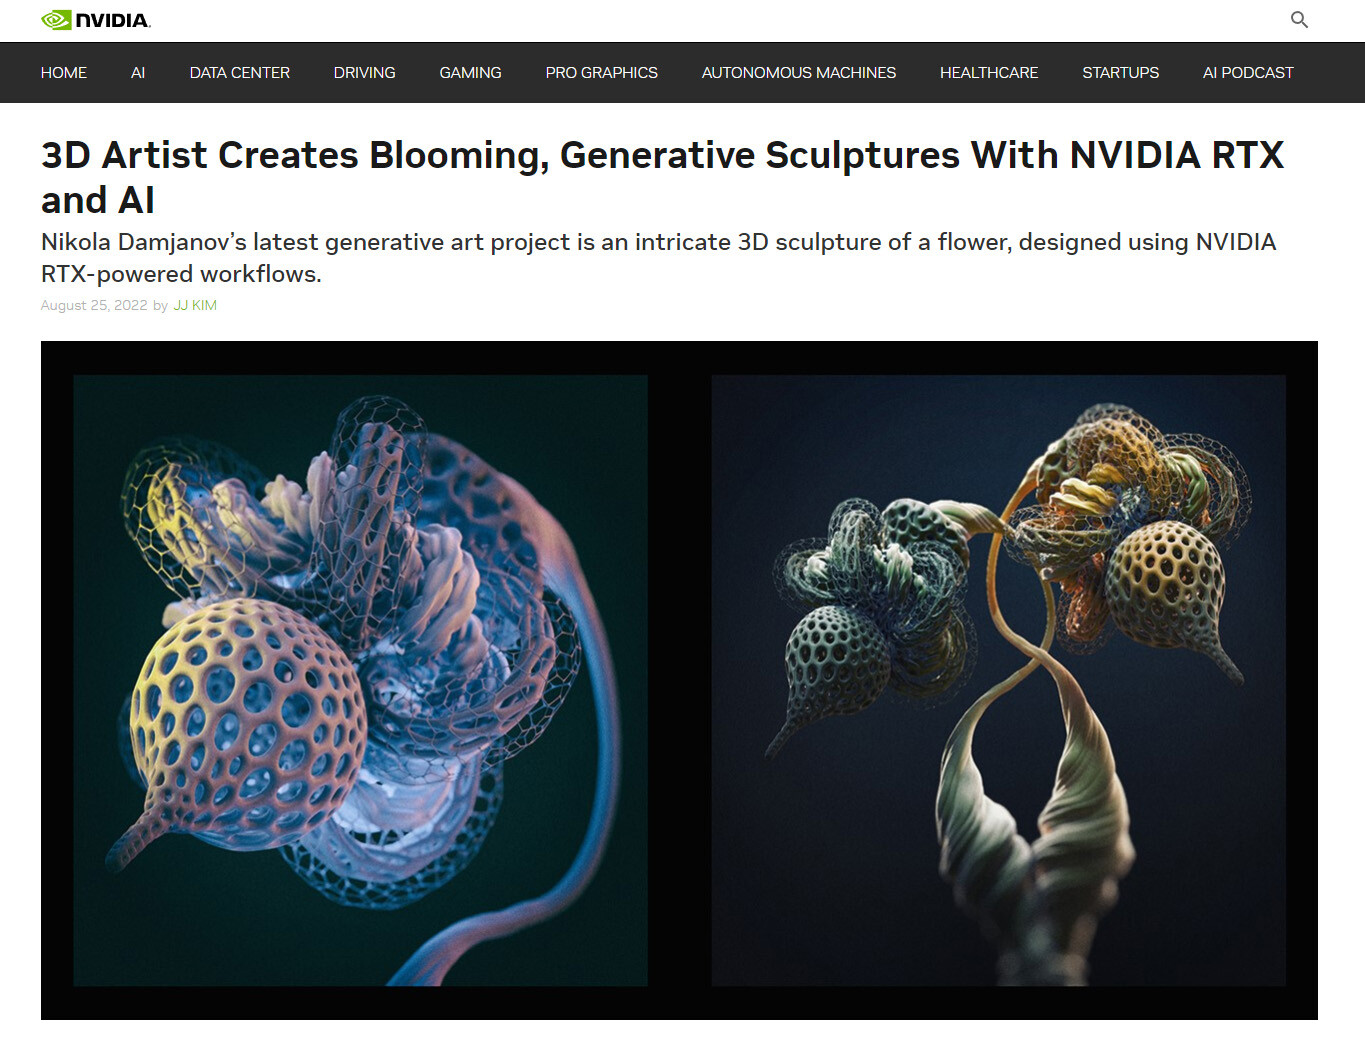 3D Artist Creates Blooming, Generative Sculptures With NVIDIA RTX and AI